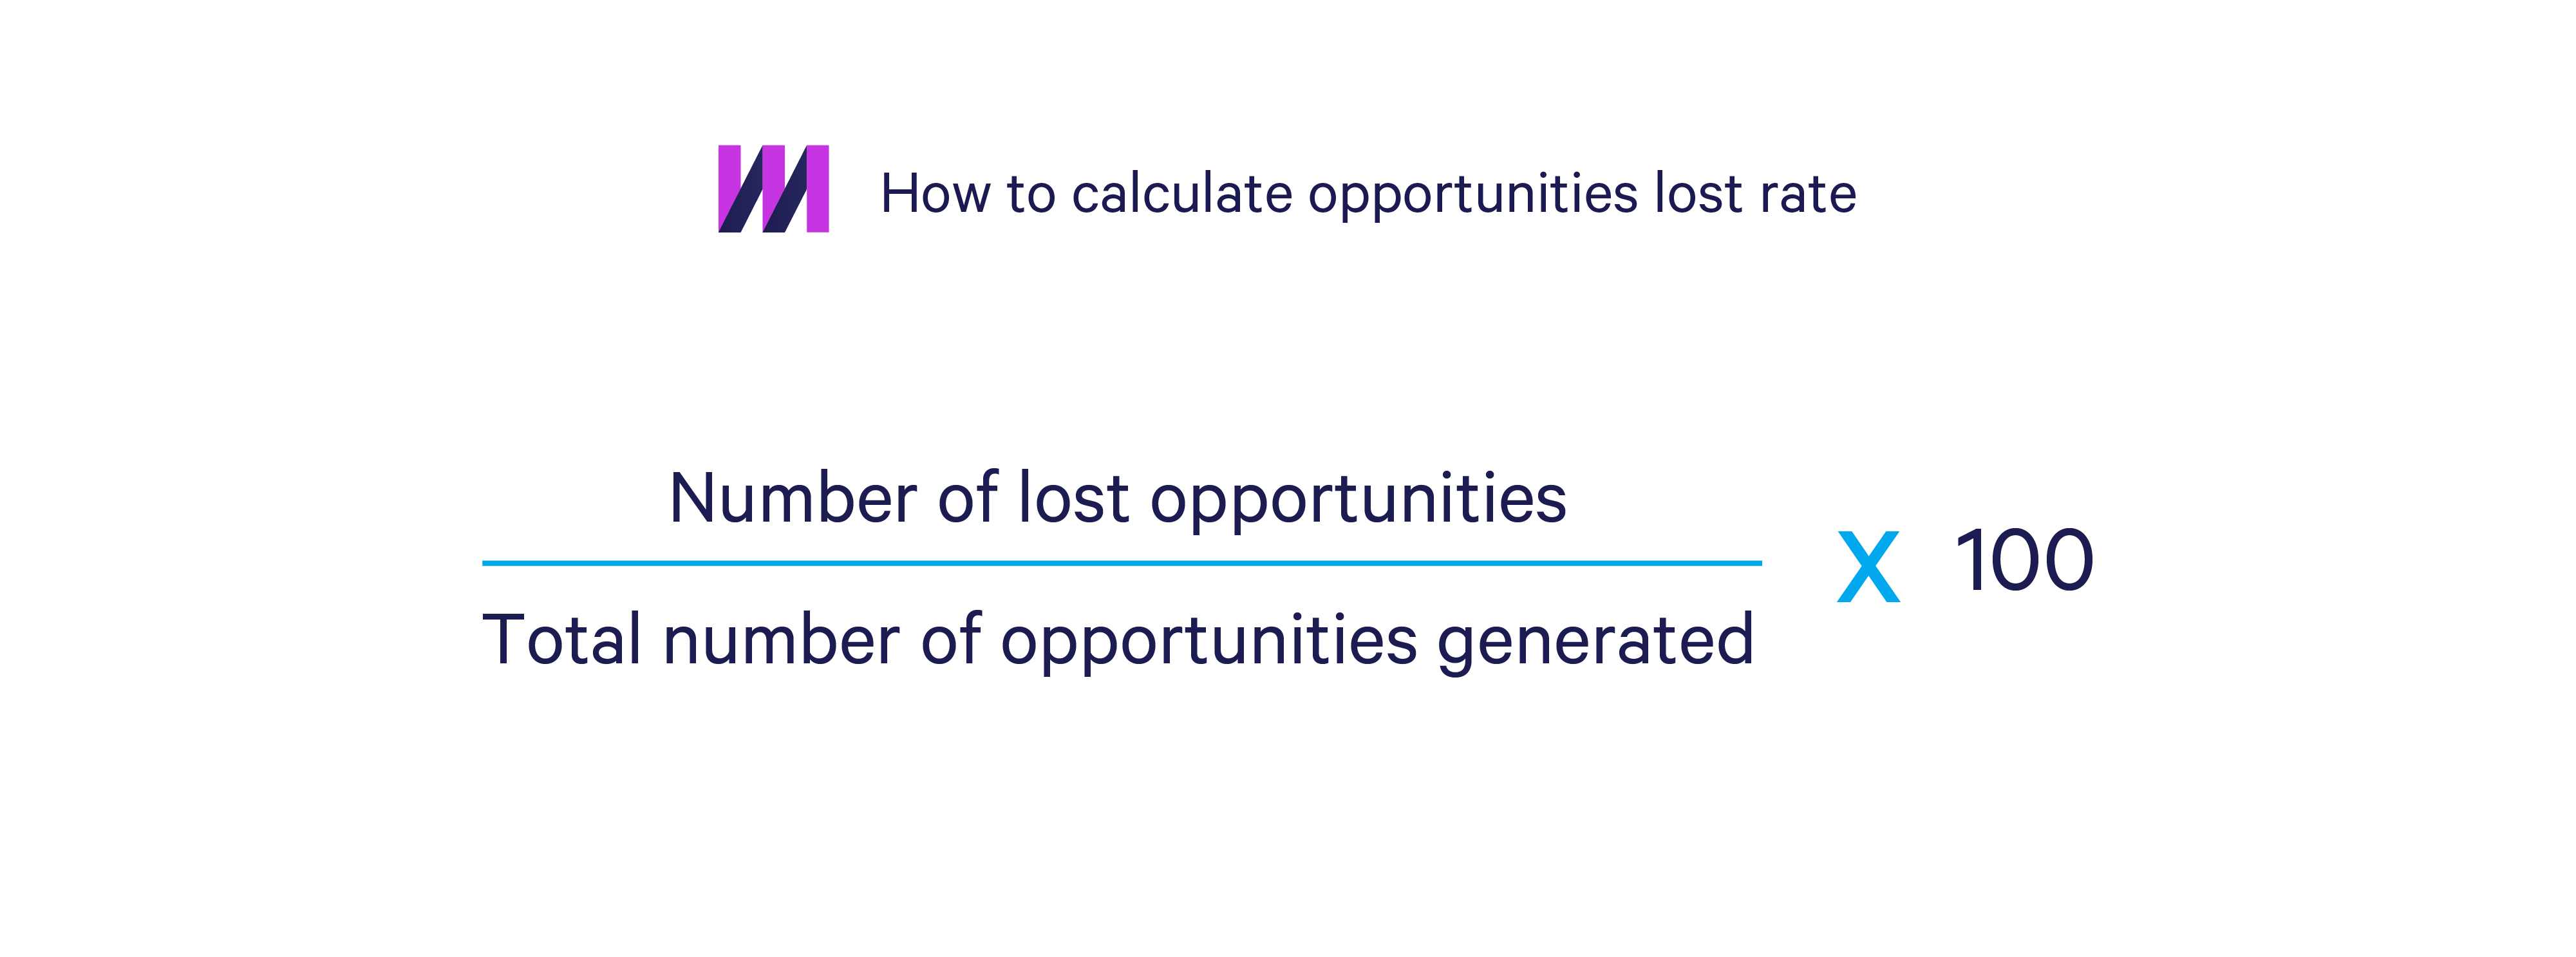 How to calculate opportunities lost rate